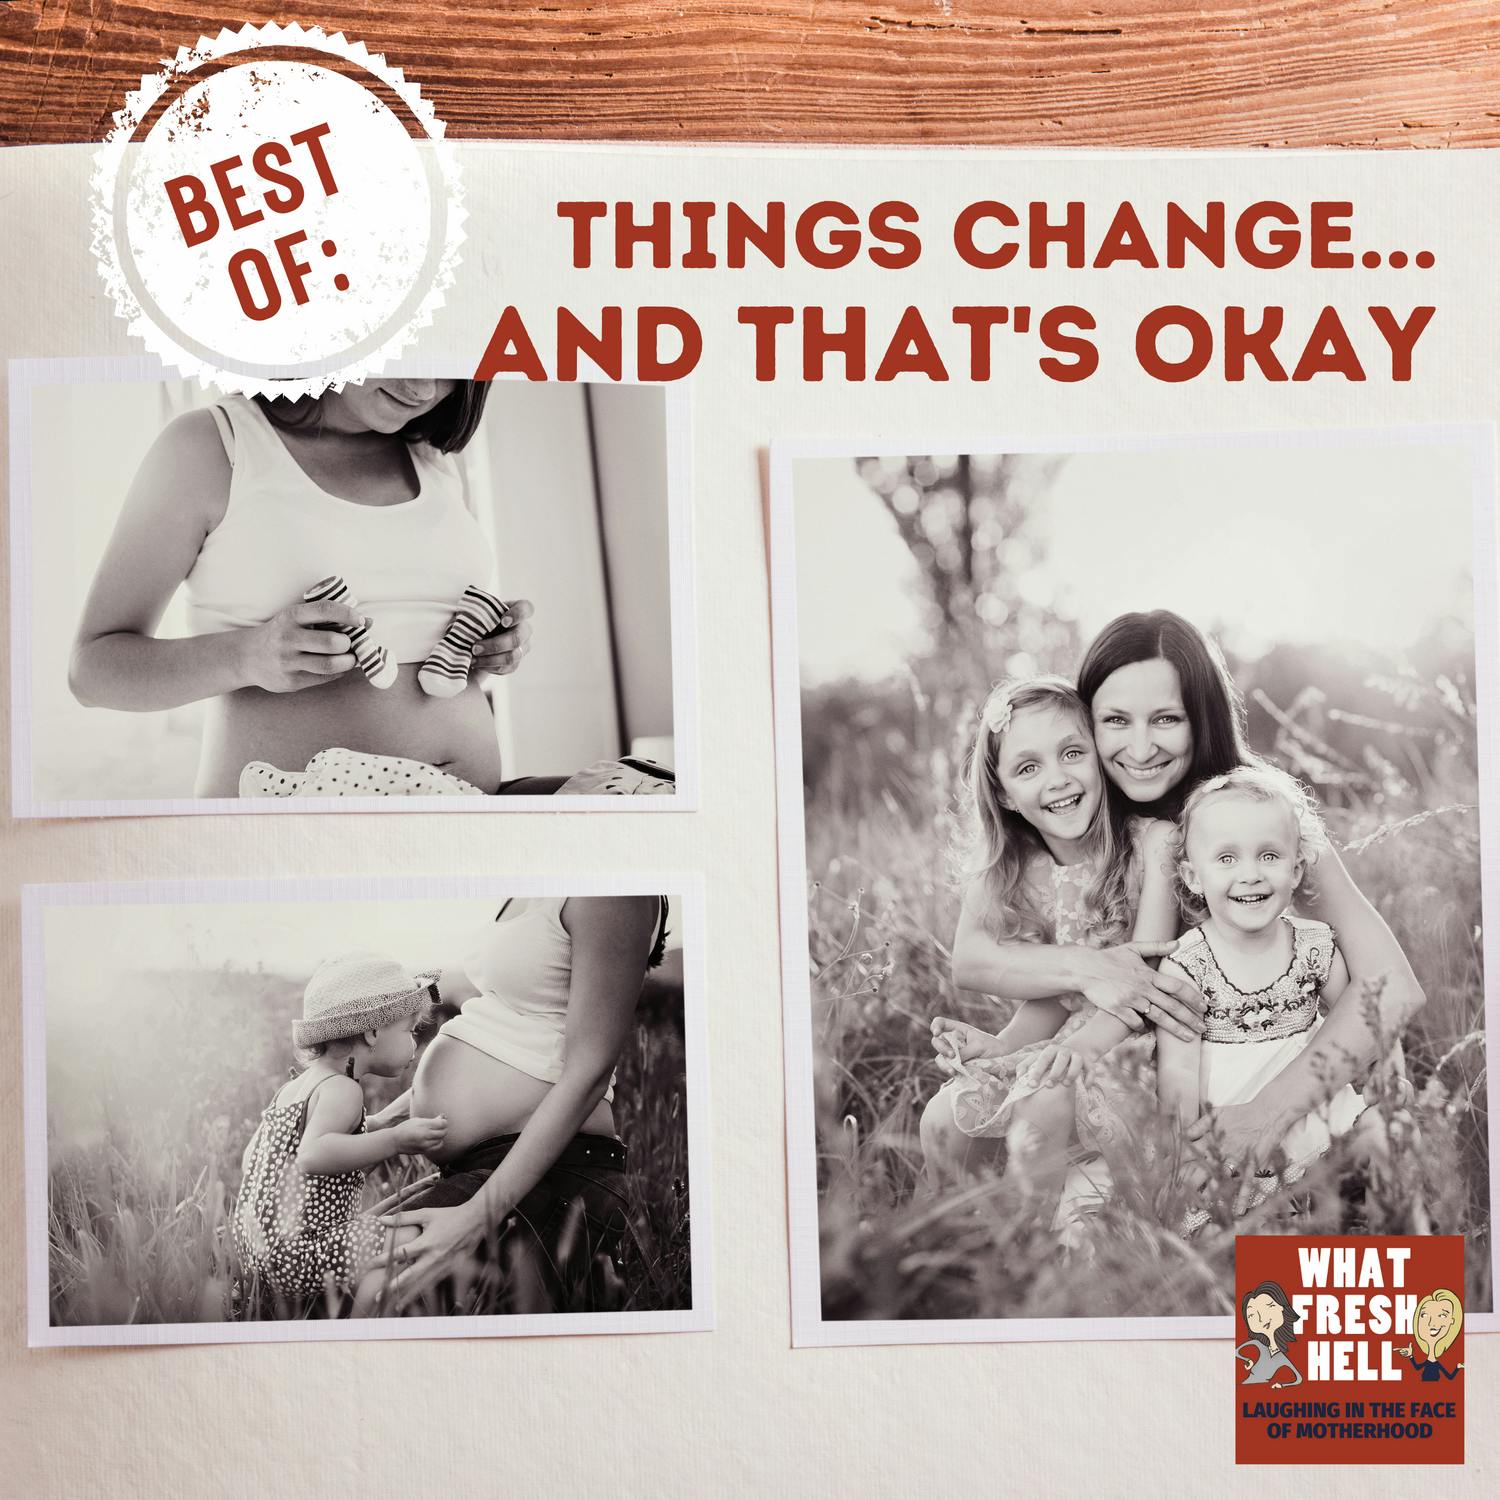 BEST OF: Things Change, and That’s OK! How Parenting Changes as Kids Get Older